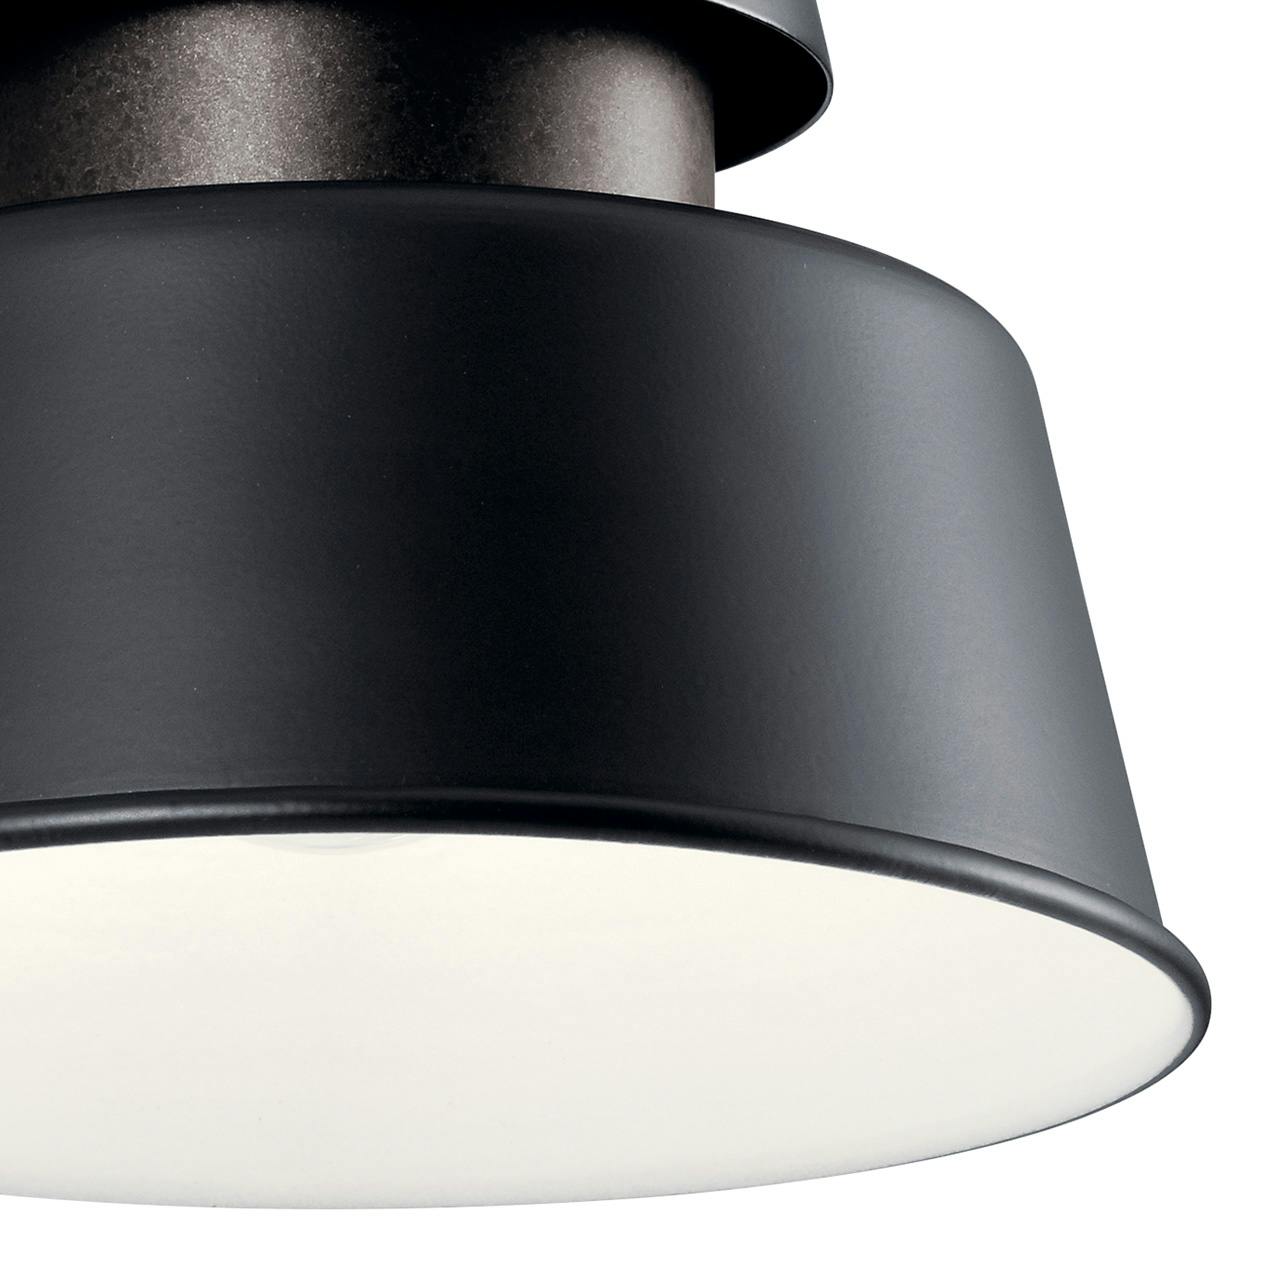 Close up view of the Lozano 9.75" 1 Light Wall Light Black on a white background